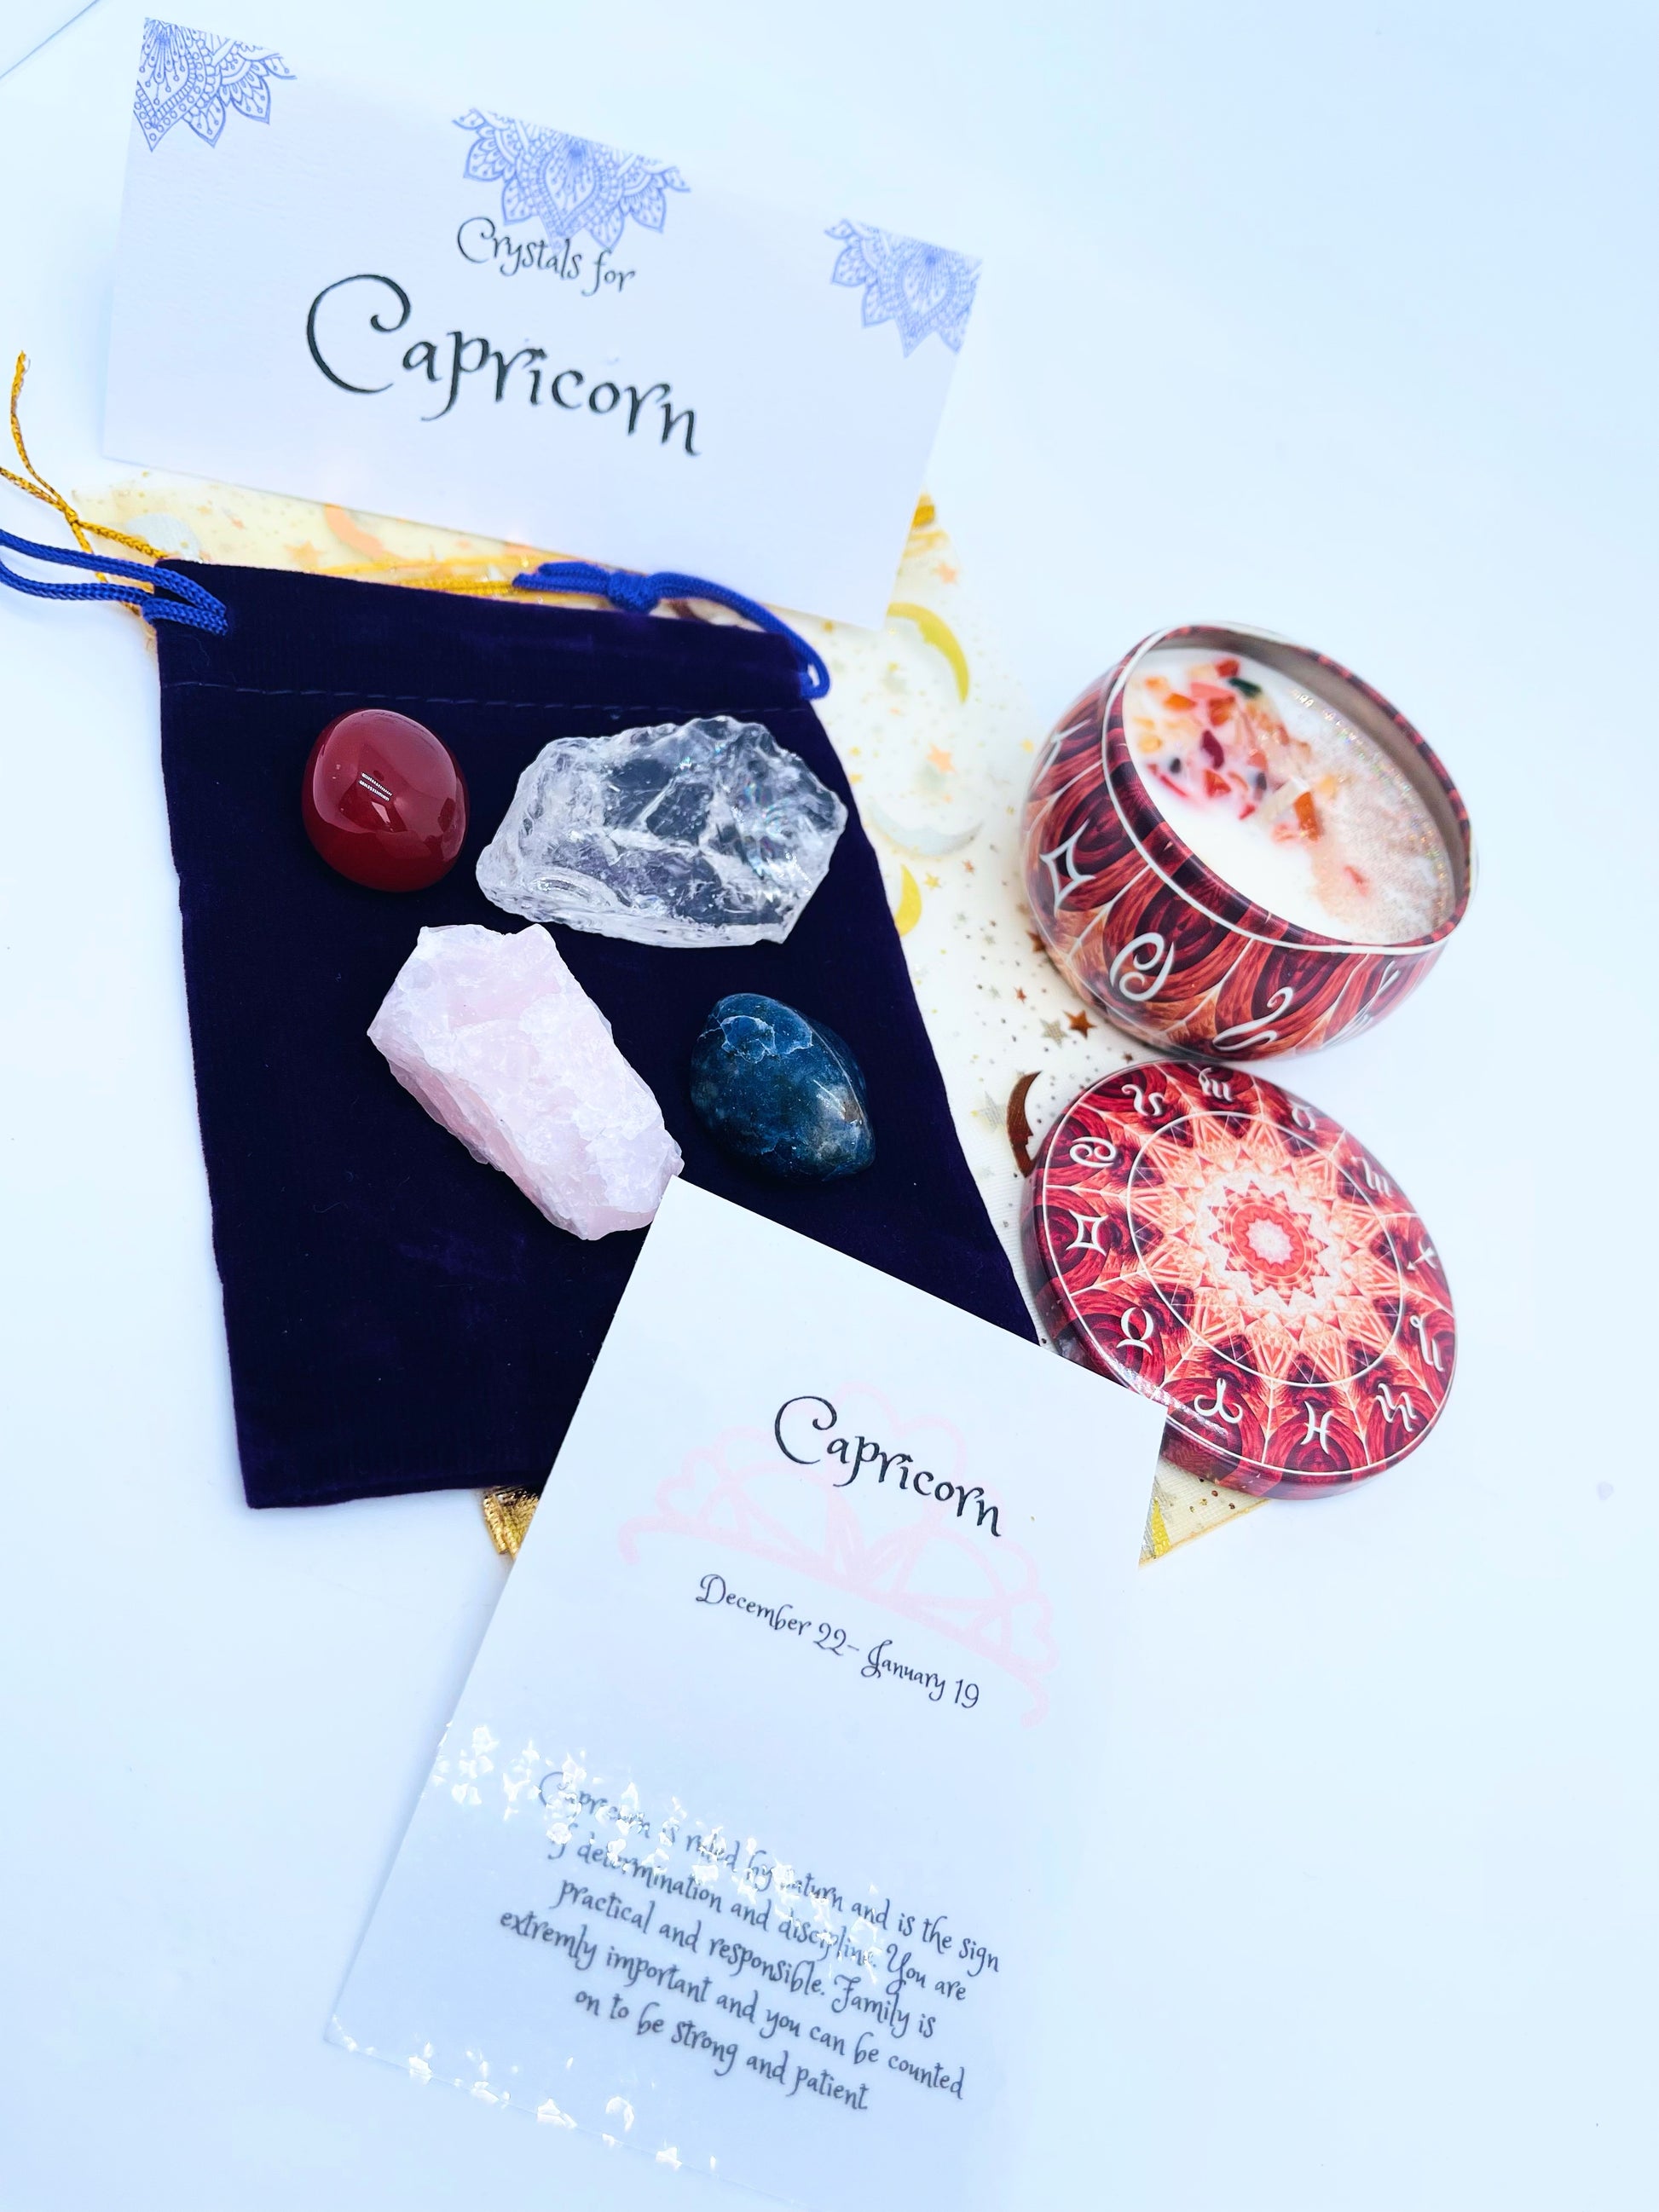 Capricorn zodiac candle gift set with candle and four crystals for this sign sitting on a velvet bag.